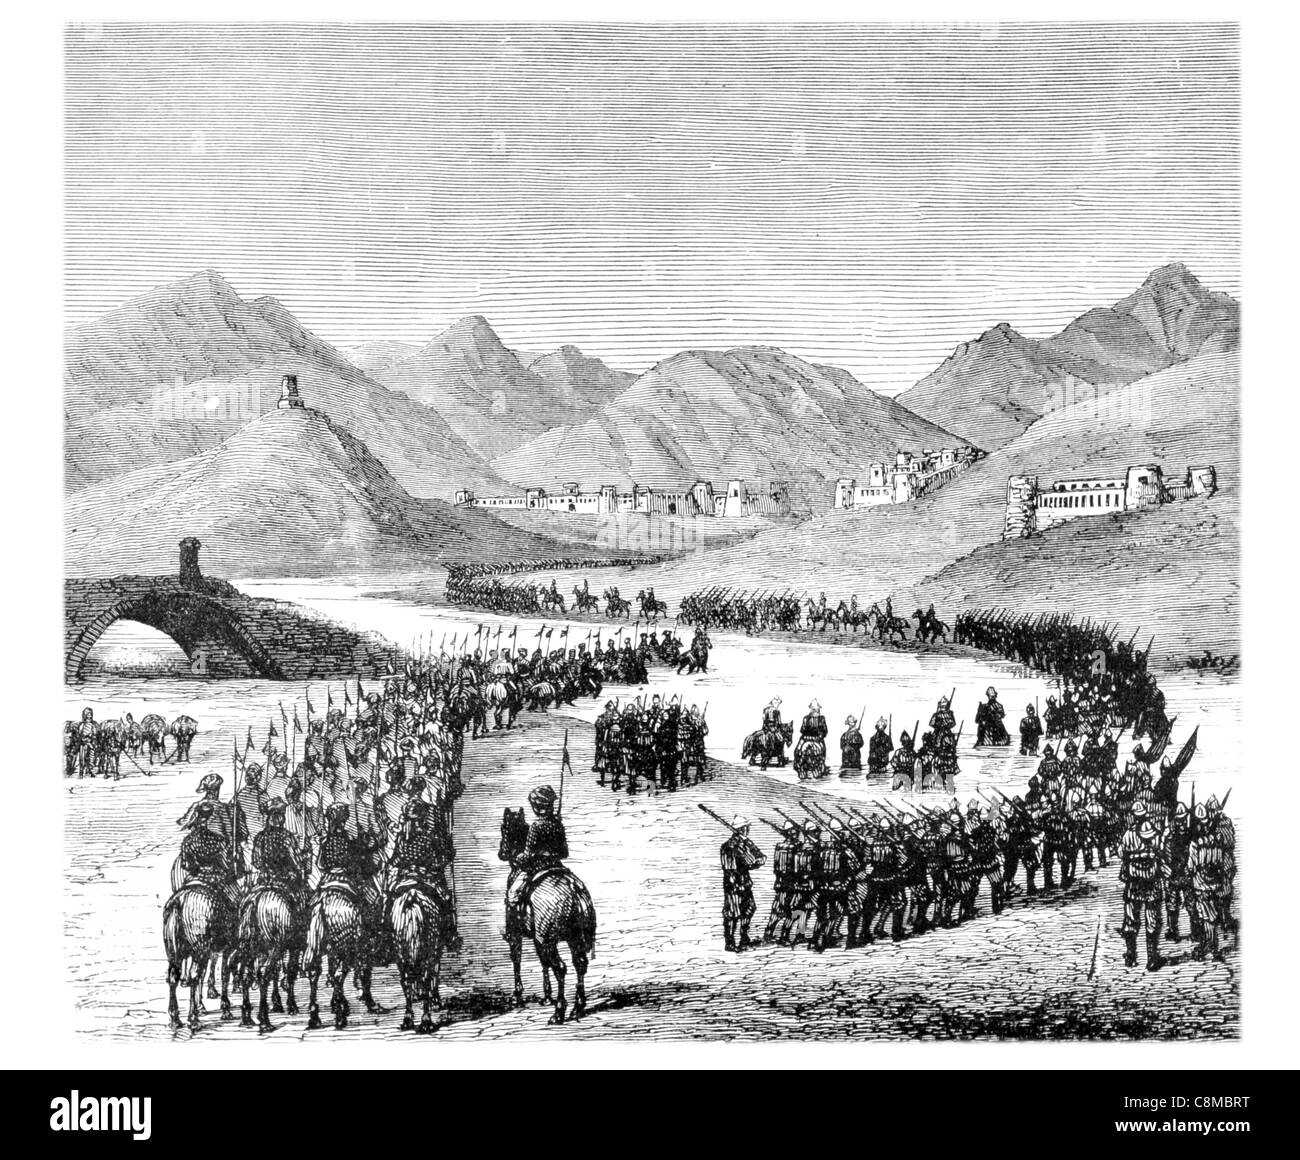 General Ross's division crossing the Logar River on its way to meet sir Donald Stewart War conflict battle fight warfare combat Stock Photo